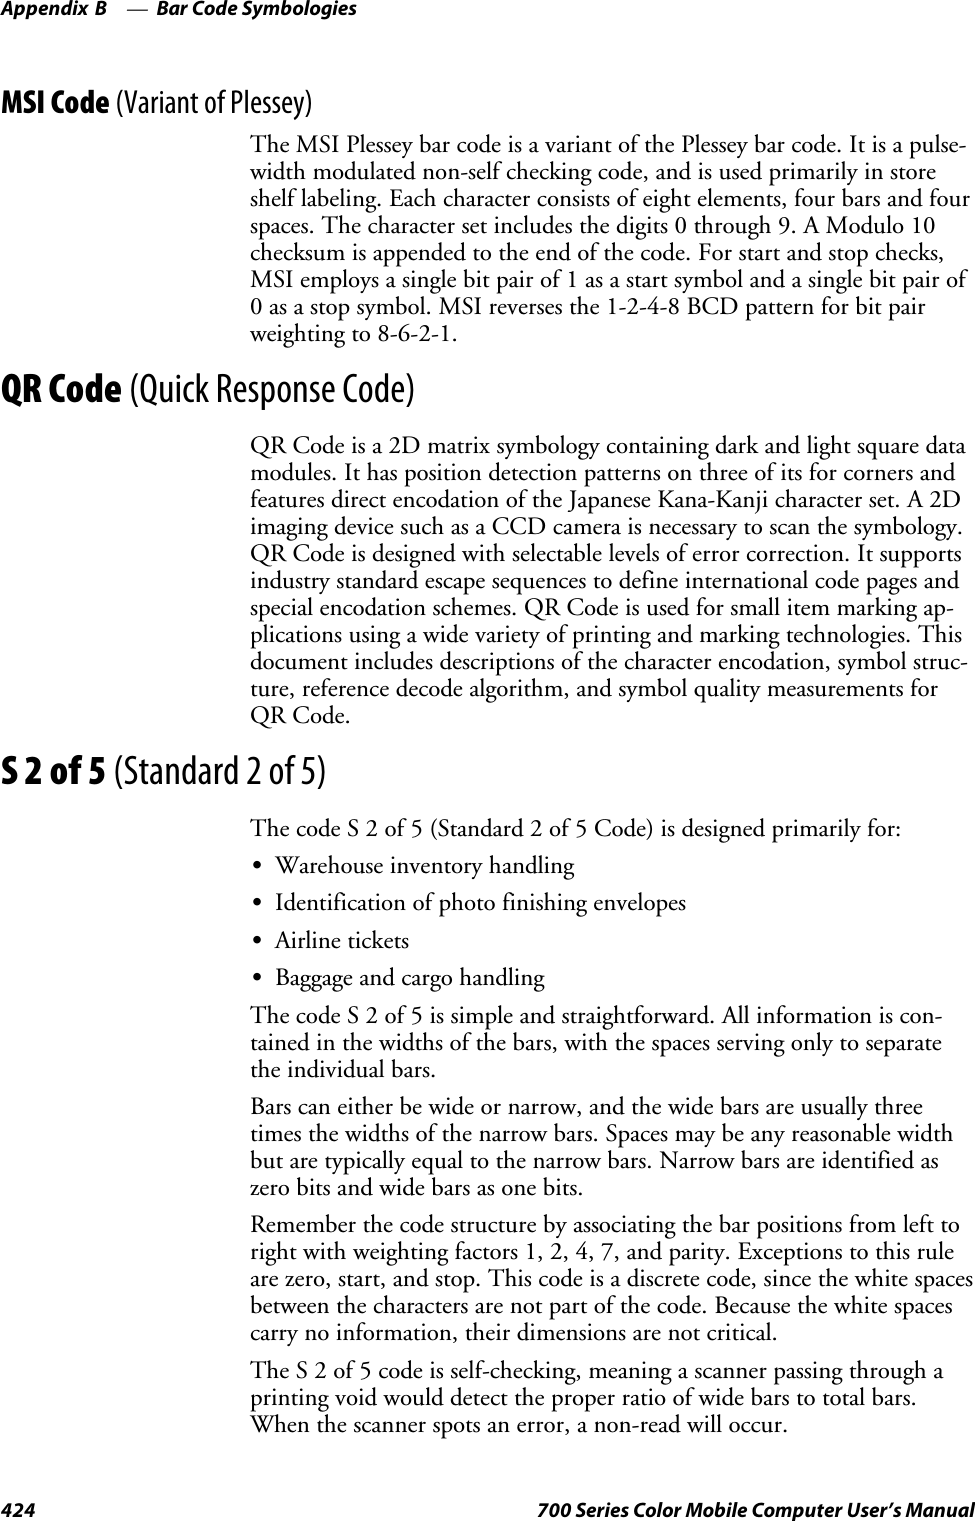 Bar Code SymbologiesAppendix —B424 700 Series Color Mobile Computer User’s ManualMSI Code (Variant of Plessey)The MSI Plessey bar code is a variant of the Plessey bar code. It is a pulse-width modulated non-self checking code, and is used primarily in storeshelf labeling. Each character consists of eight elements, four bars and fourspaces. The character set includes the digits 0 through 9. A Modulo 10checksum is appended to the end of the code. For start and stop checks,MSI employs a single bit pair of 1 as a start symbol and a single bit pair of0 as a stop symbol. MSI reverses the 1-2-4-8 BCD pattern for bit pairweighting to 8-6-2-1.QR Code (Quick Response Code)QR Code is a 2D matrix symbology containing dark and light square datamodules. It has position detection patterns on three of its for corners andfeatures direct encodation of the Japanese Kana-Kanji character set. A 2Dimaging device such as a CCD camera is necessary to scan the symbology.QR Code is designed with selectable levels of error correction. It supportsindustry standard escape sequences to define international code pages andspecial encodation schemes. QR Code is used for small item marking ap-plications using a wide variety of printing and marking technologies. Thisdocument includes descriptions of the character encodation, symbol struc-ture, reference decode algorithm, and symbol quality measurements forQR Code.S2of5(Standard 2 of 5)The code S 2 of 5 (Standard 2 of 5 Code) is designed primarily for:SWarehouse inventory handlingSIdentification of photo finishing envelopesSAirline ticketsSBaggage and cargo handlingThe code S 2 of 5 is simple and straightforward. All information is con-tained in the widths of the bars, with the spaces serving only to separatethe individual bars.Bars can either be wide or narrow, and the wide bars are usually threetimes the widths of the narrow bars. Spaces may be any reasonable widthbut are typically equal to the narrow bars. Narrow bars are identified aszero bits and wide bars as one bits.Remember the code structure by associating the bar positions from left torightwithweightingfactors1,2,4,7,andparity.Exceptionstothisruleare zero, start, and stop. This code is a discrete code, since the white spacesbetween the characters are not part of the code. Because the white spacescarry no information, their dimensions are not critical.The S 2 of 5 code is self-checking, meaning a scanner passing through aprinting void would detect the proper ratio of wide bars to total bars.When the scanner spots an error, a non-read will occur.